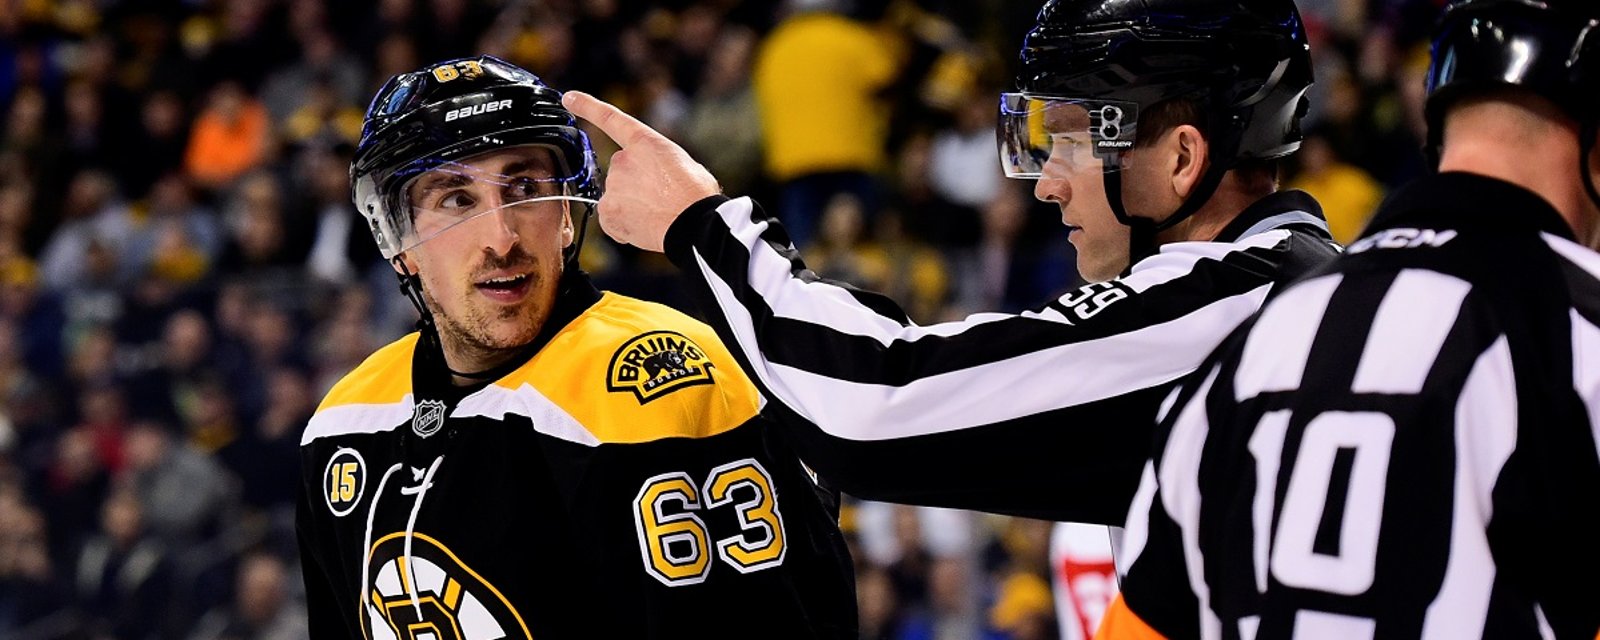 NHL referee called out after brutal call against Brad Marchand.